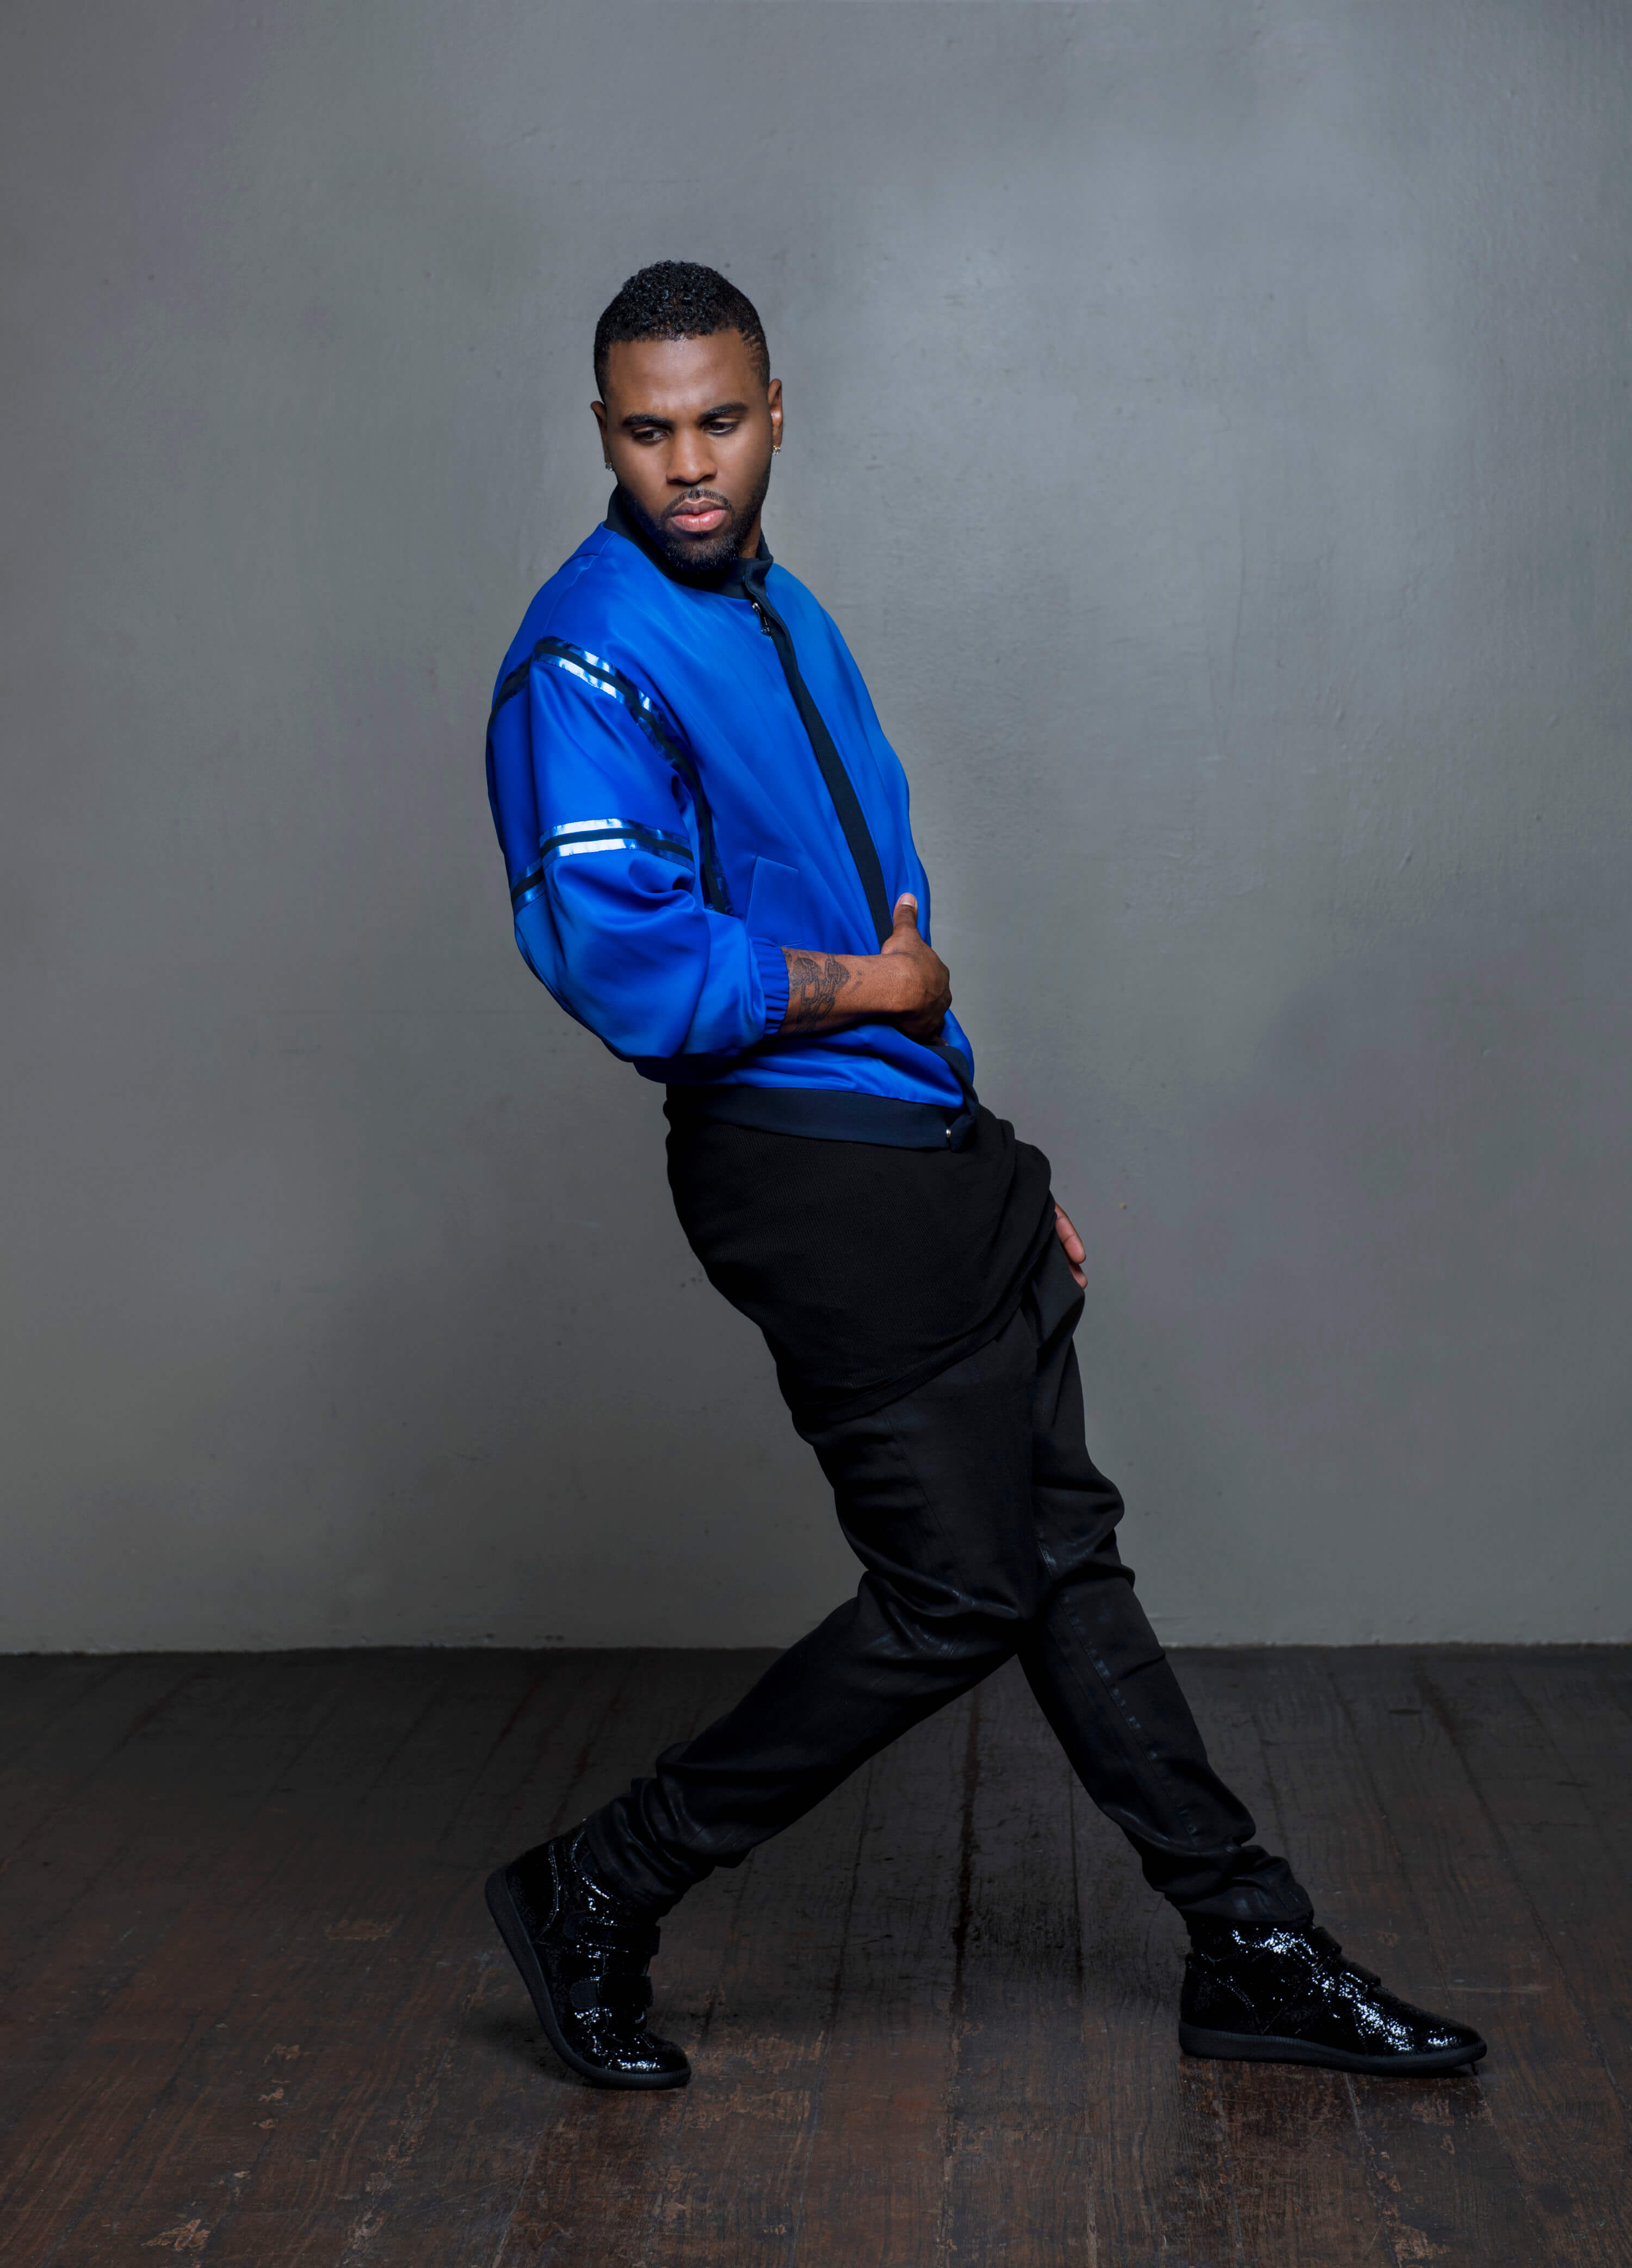 Jason Derulo and Redfoo are Set to Bring a Show-stopping Dance Phenomenon to Manila on May 27